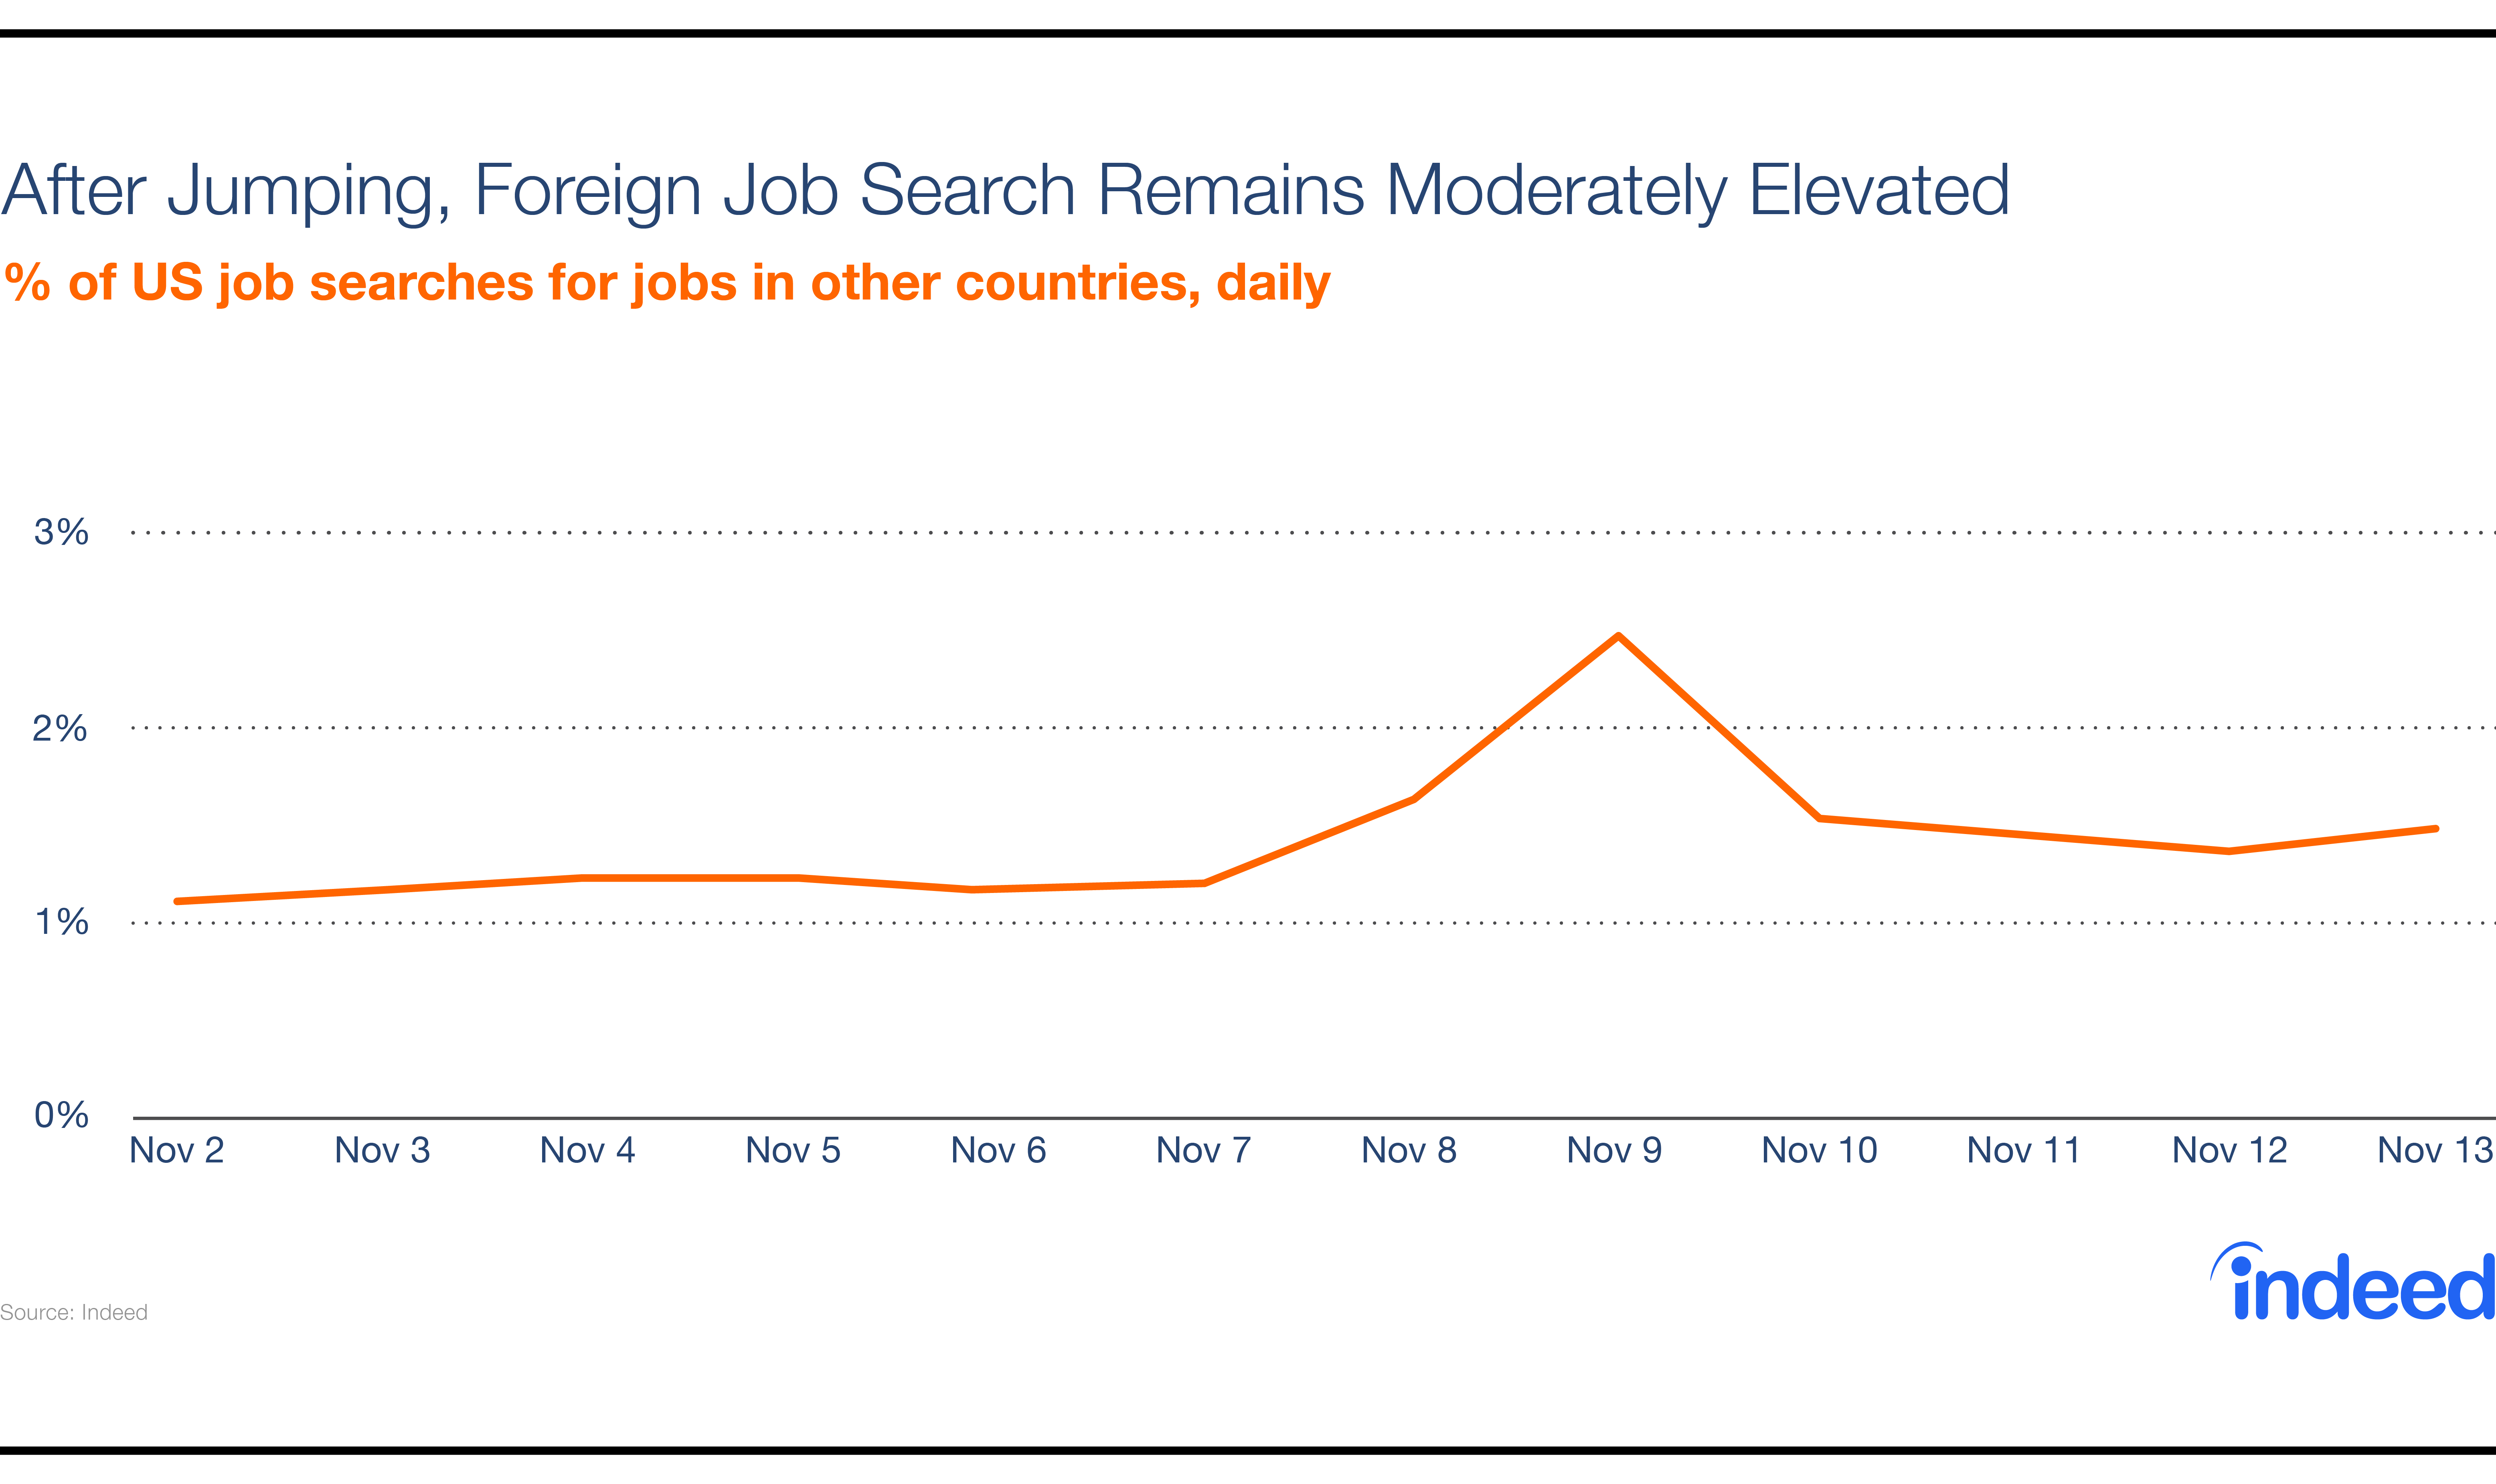 After jumping, foreign job search remains moderately elevated